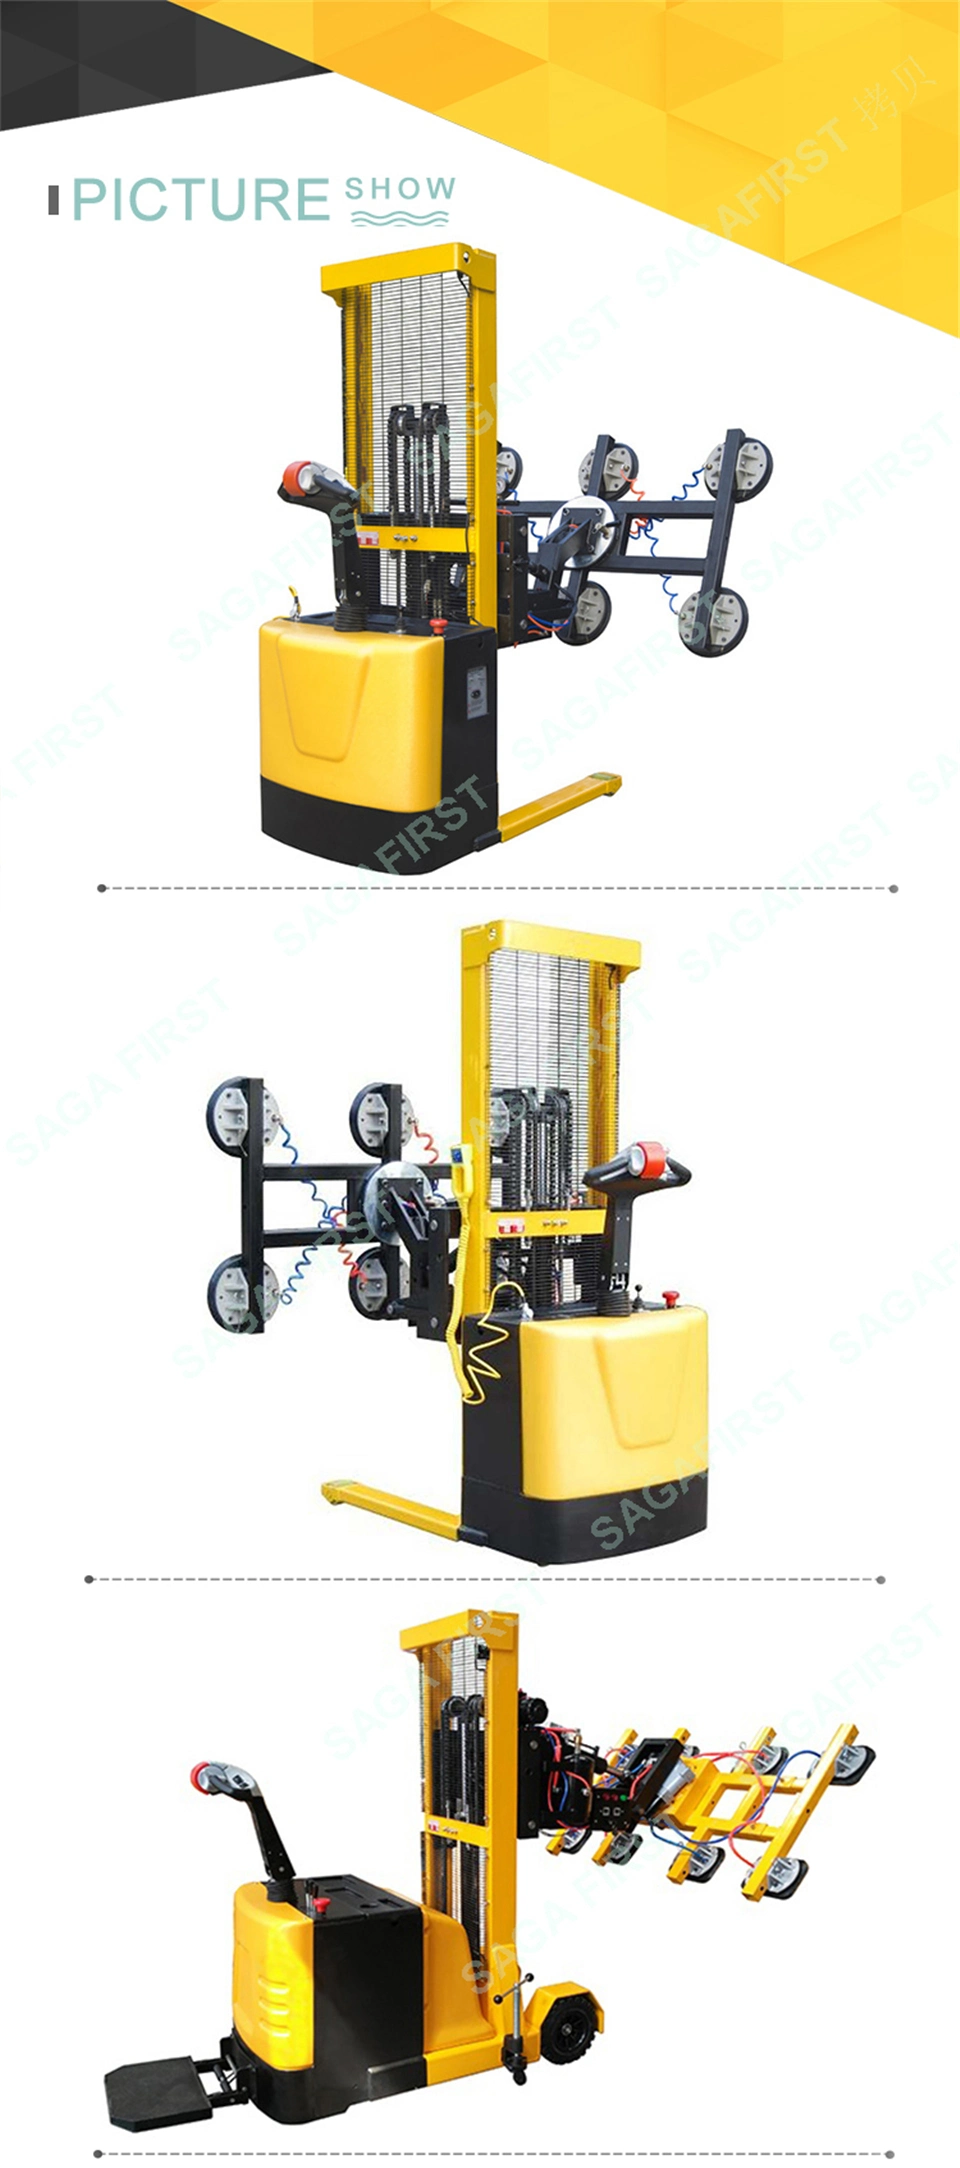 Handling Moving and Installing Vacuum Glass Lifter for EU